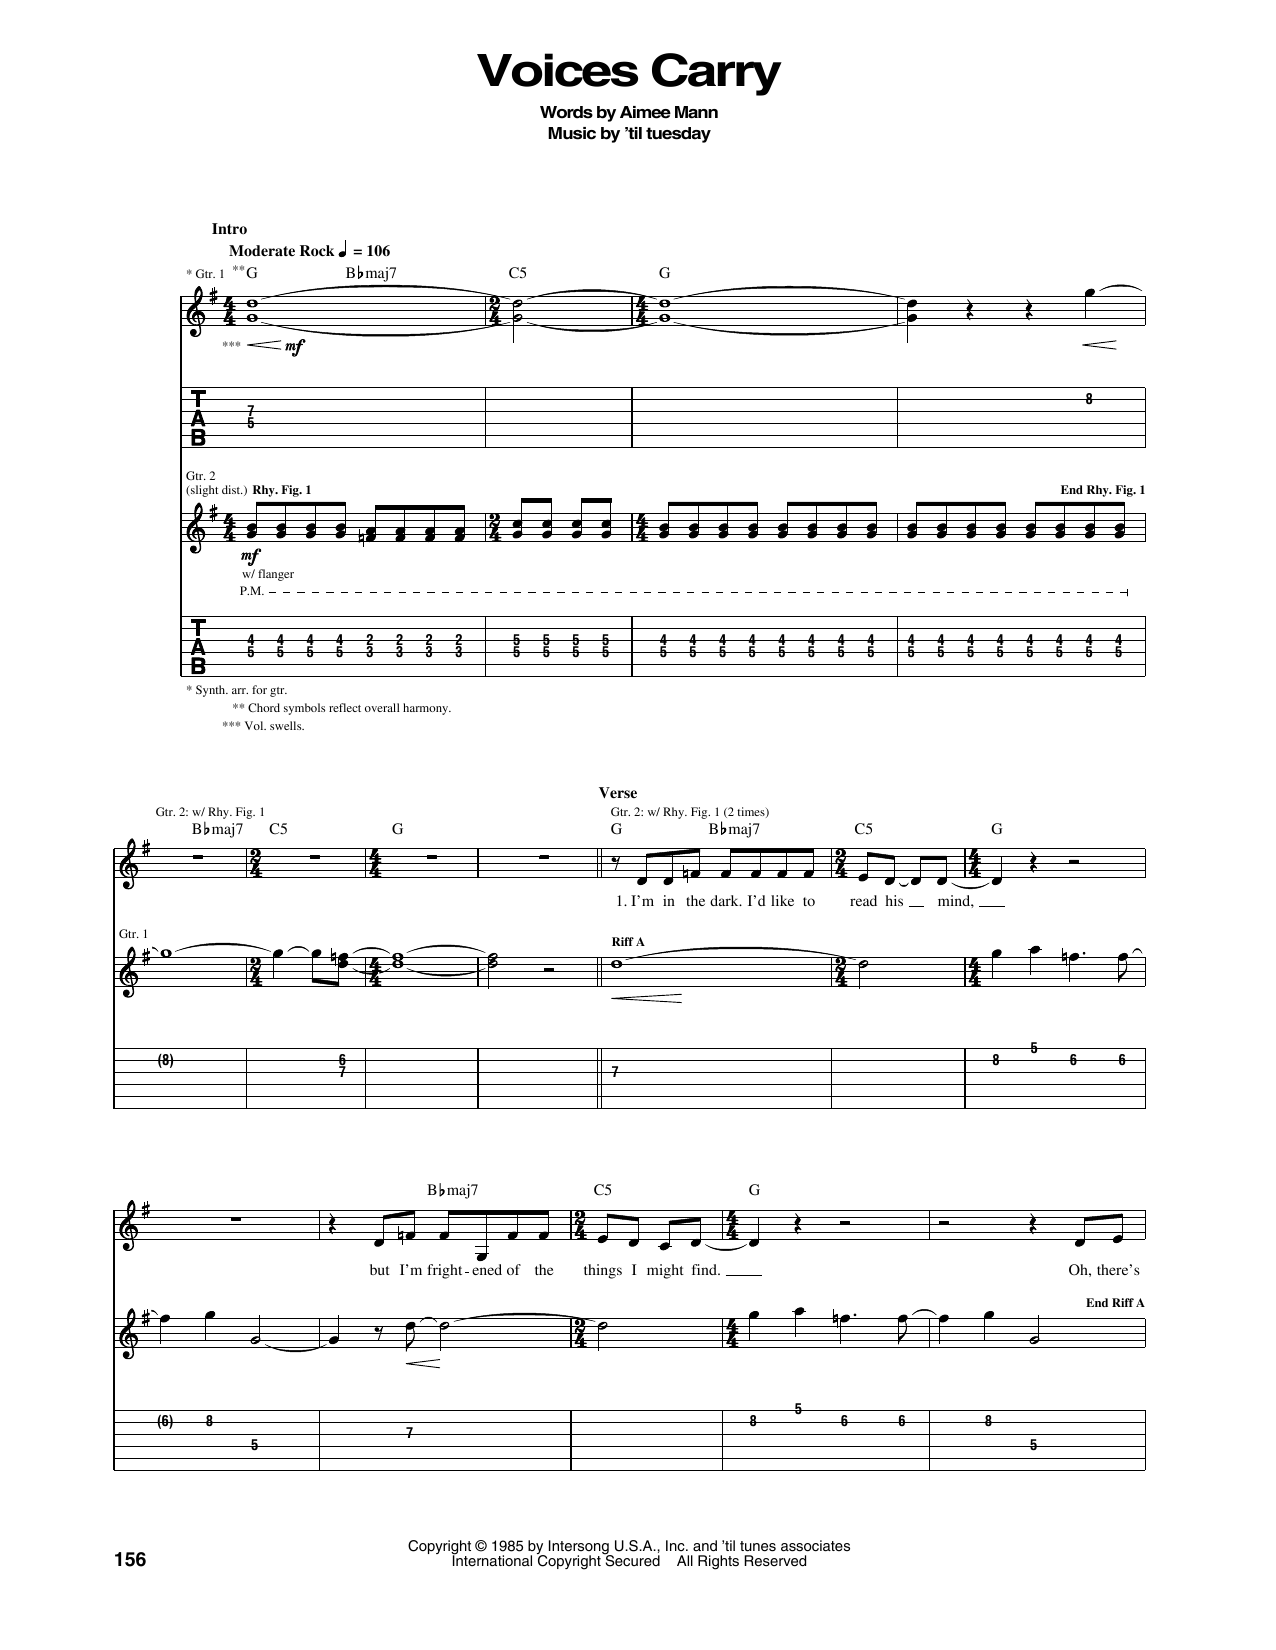 Download 'til tuesday Voices Carry Sheet Music